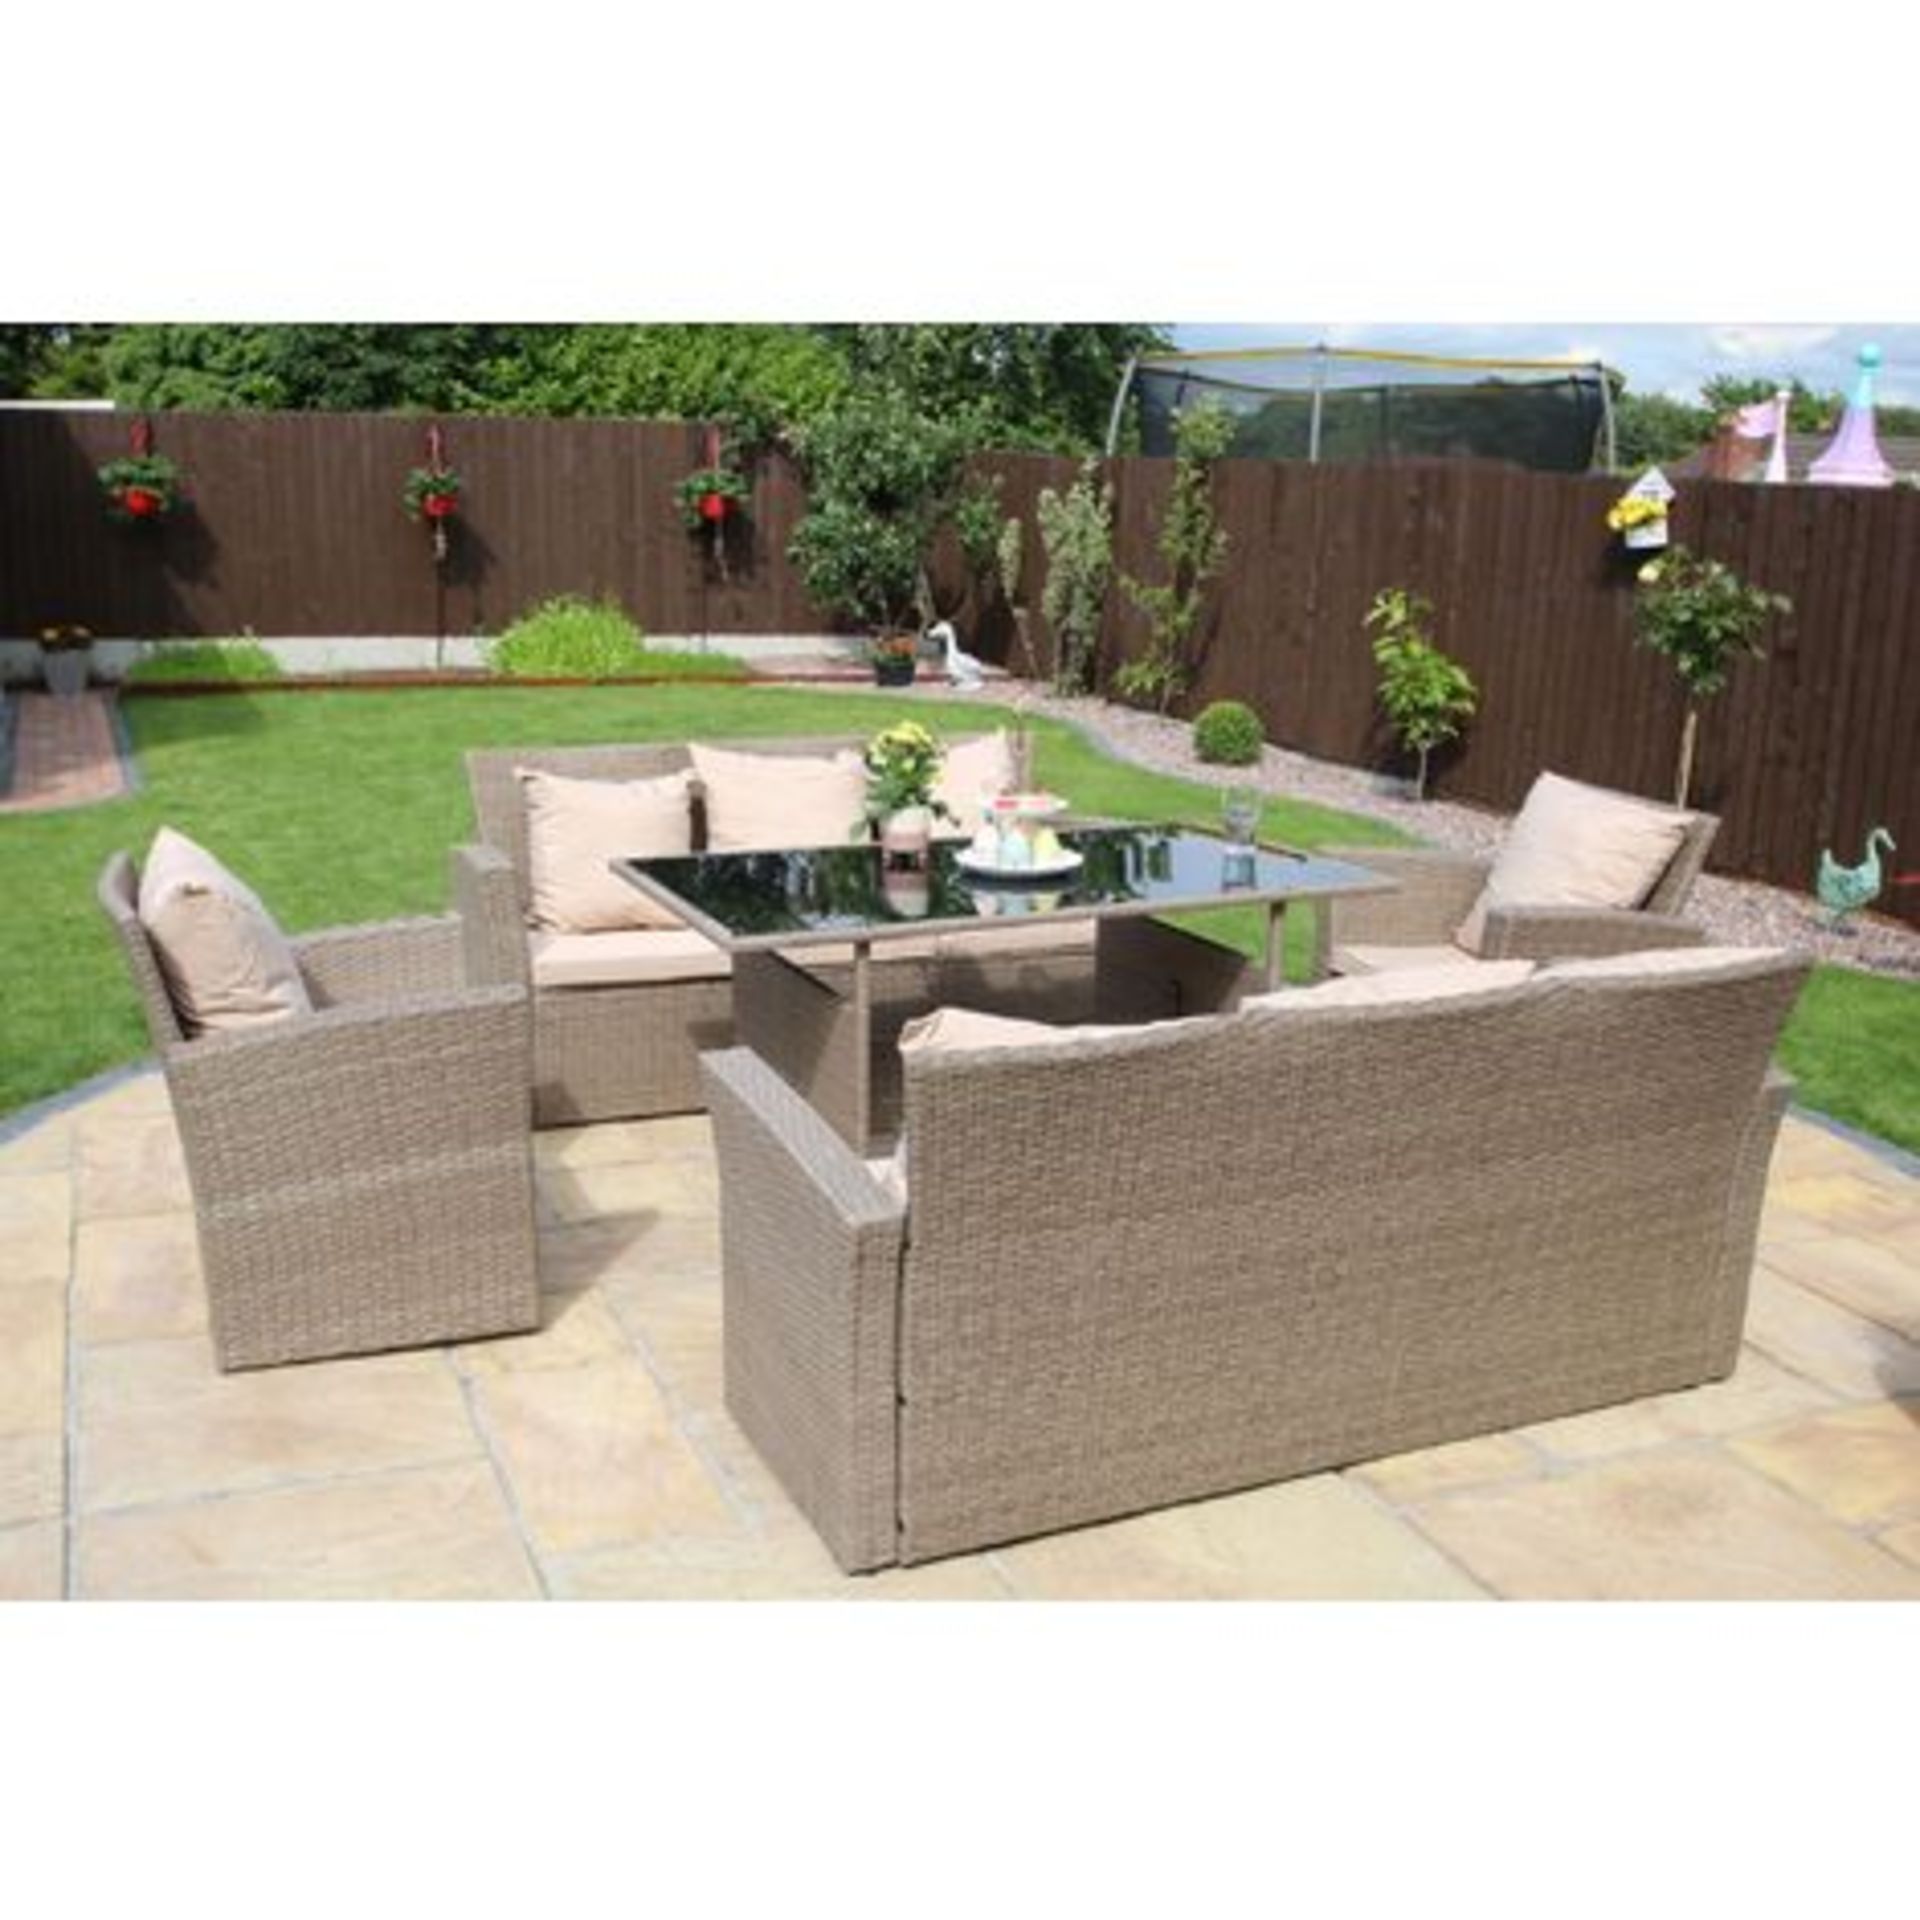 V Brand New 8 Seater Rattan Garden Dining Set Including 2 x Three Seater Sofas + 2 x Armchairs + - Image 2 of 2